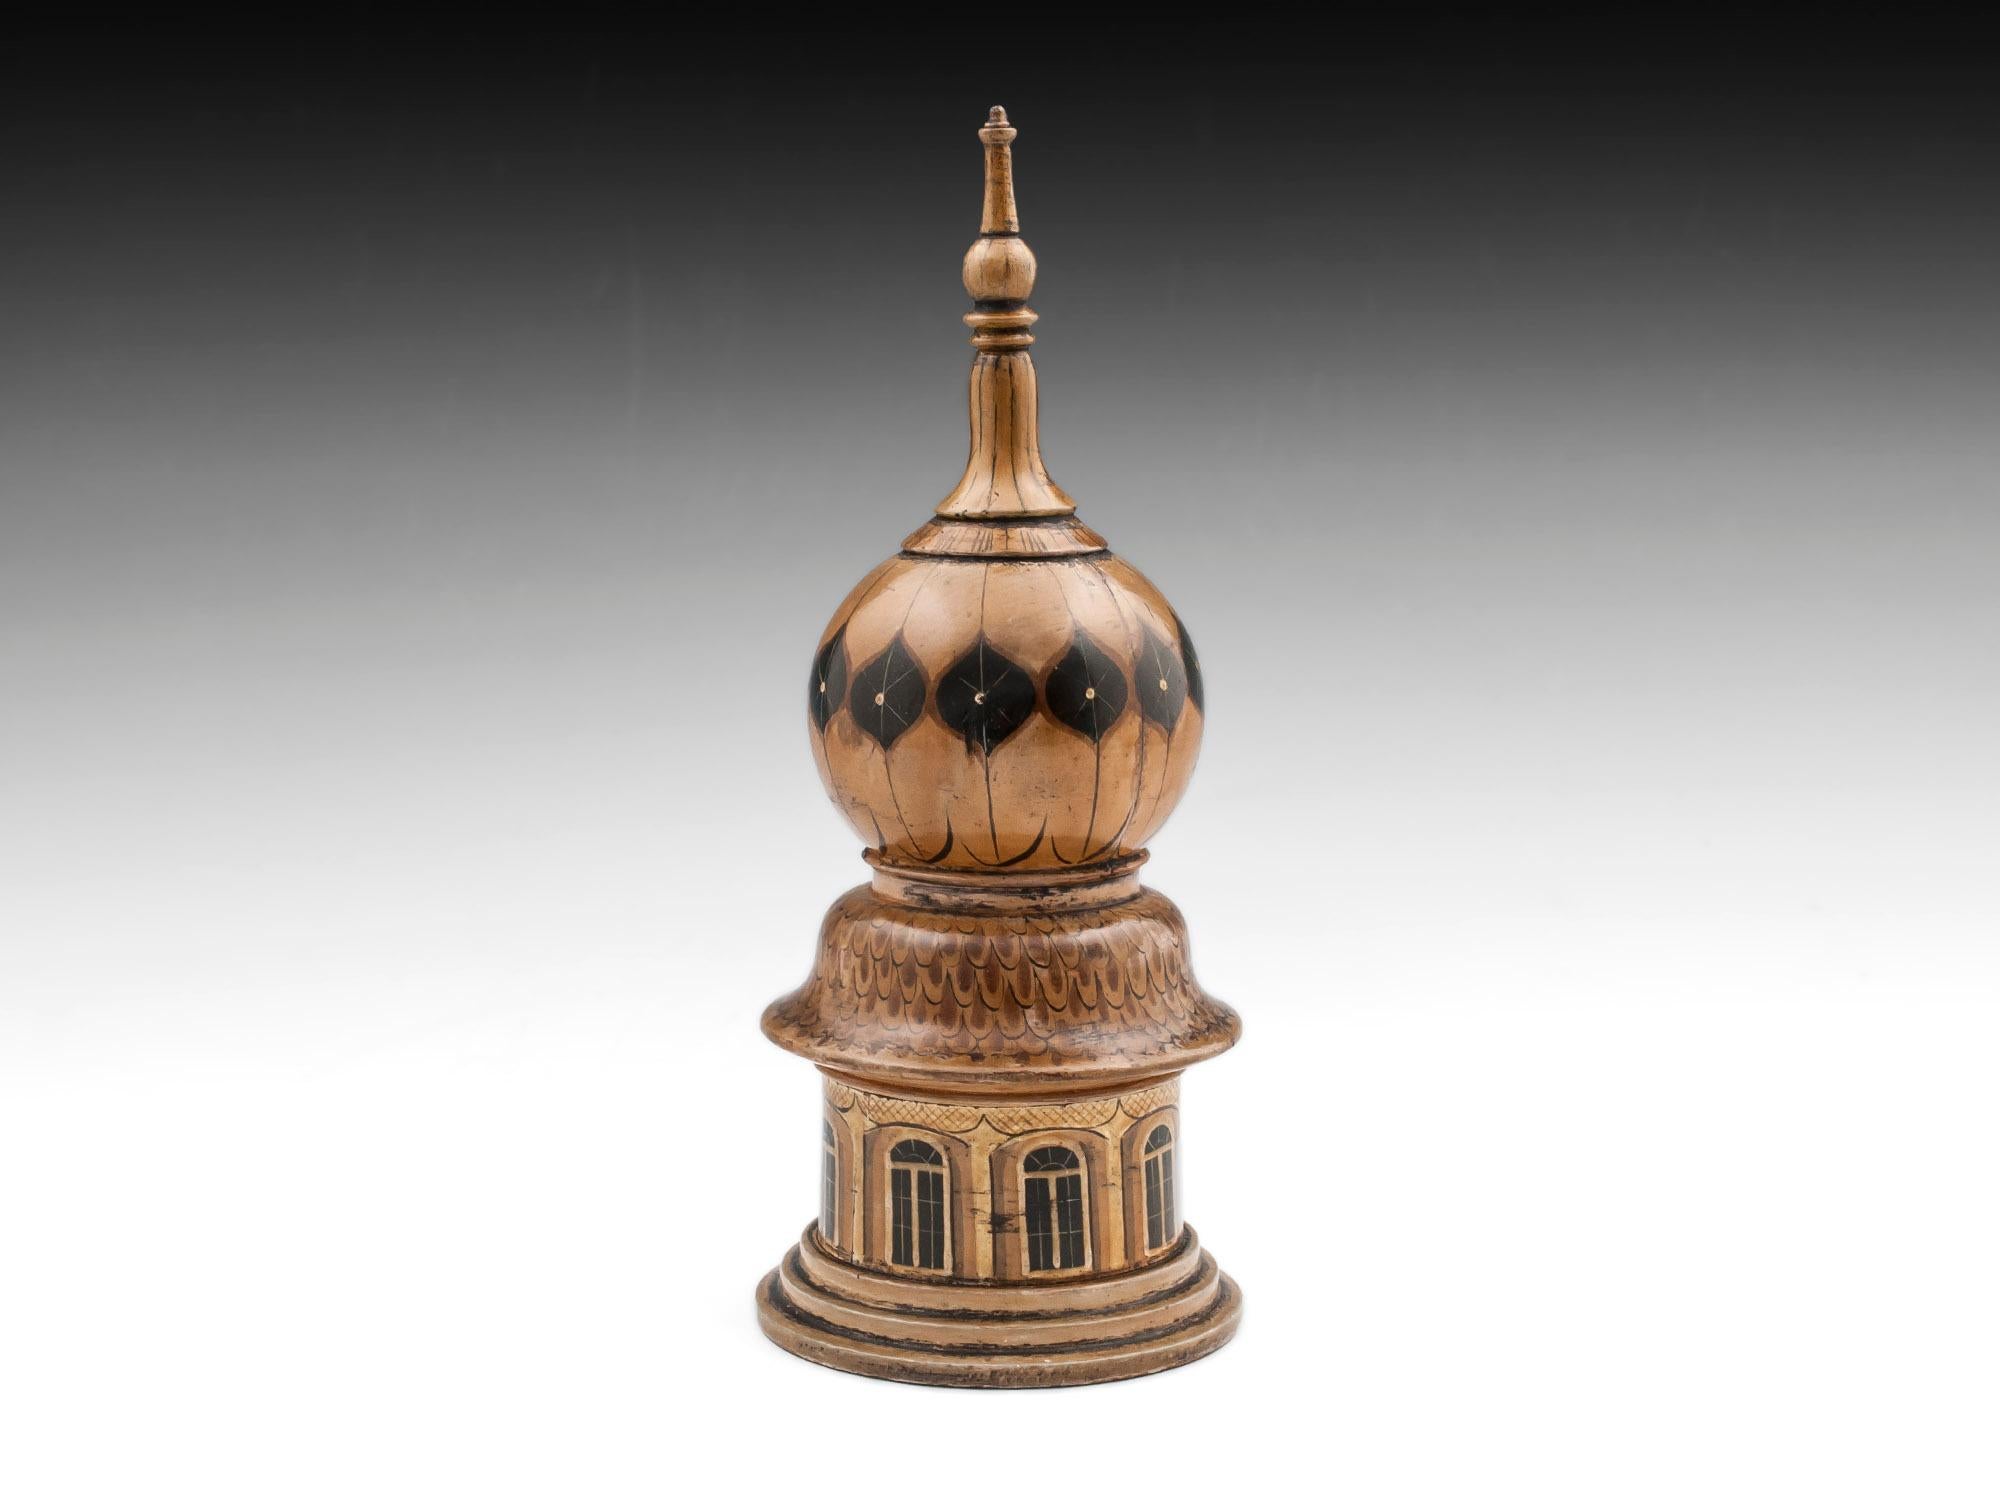 A stunning compendium of architectural design, inspired by Nash’s Brighton Pavilion. The onion shaped top unscrews to reveal a pin cushion which shows signs of little wear, the castle base also unscrews revealing the thimble, tape, waxer, pin